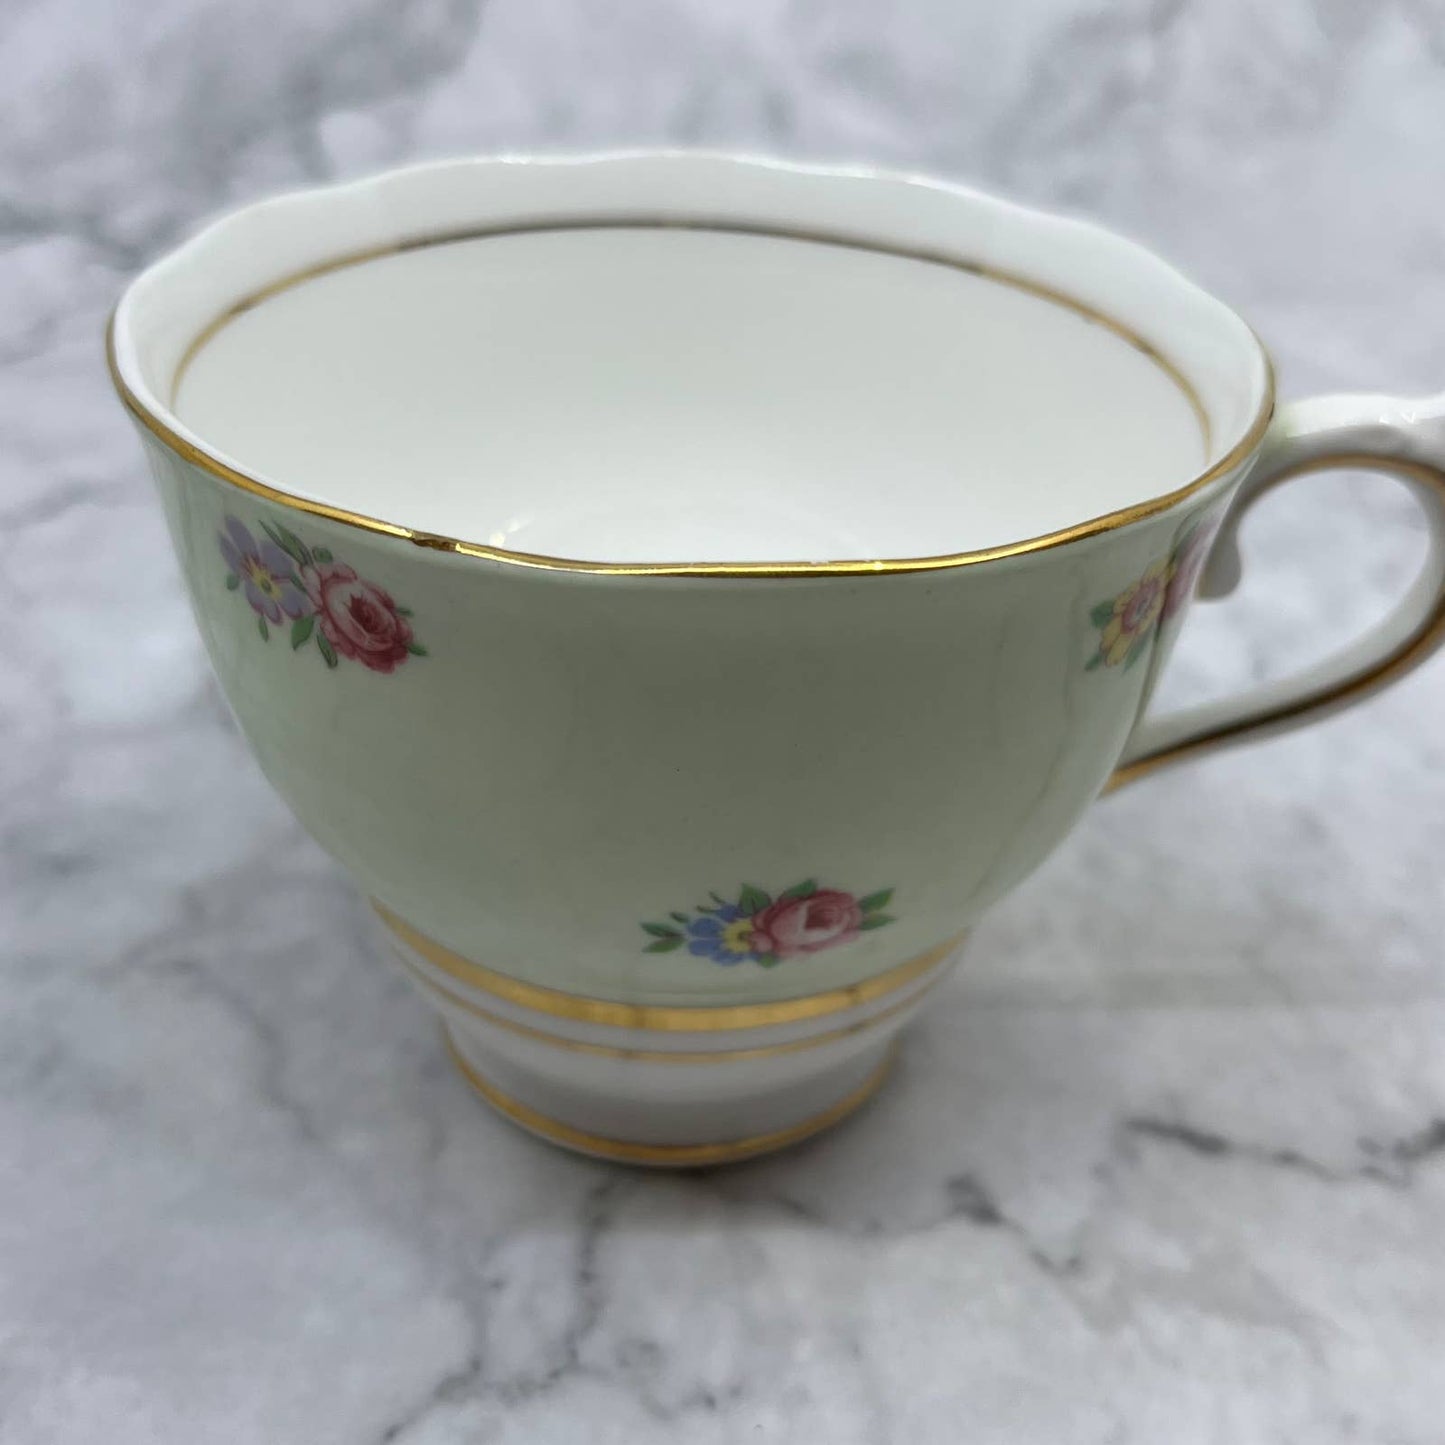 COLCLOUGH Bone China Cup and Saucer England  Yellow Gold Trim, Pattern Roses TD1